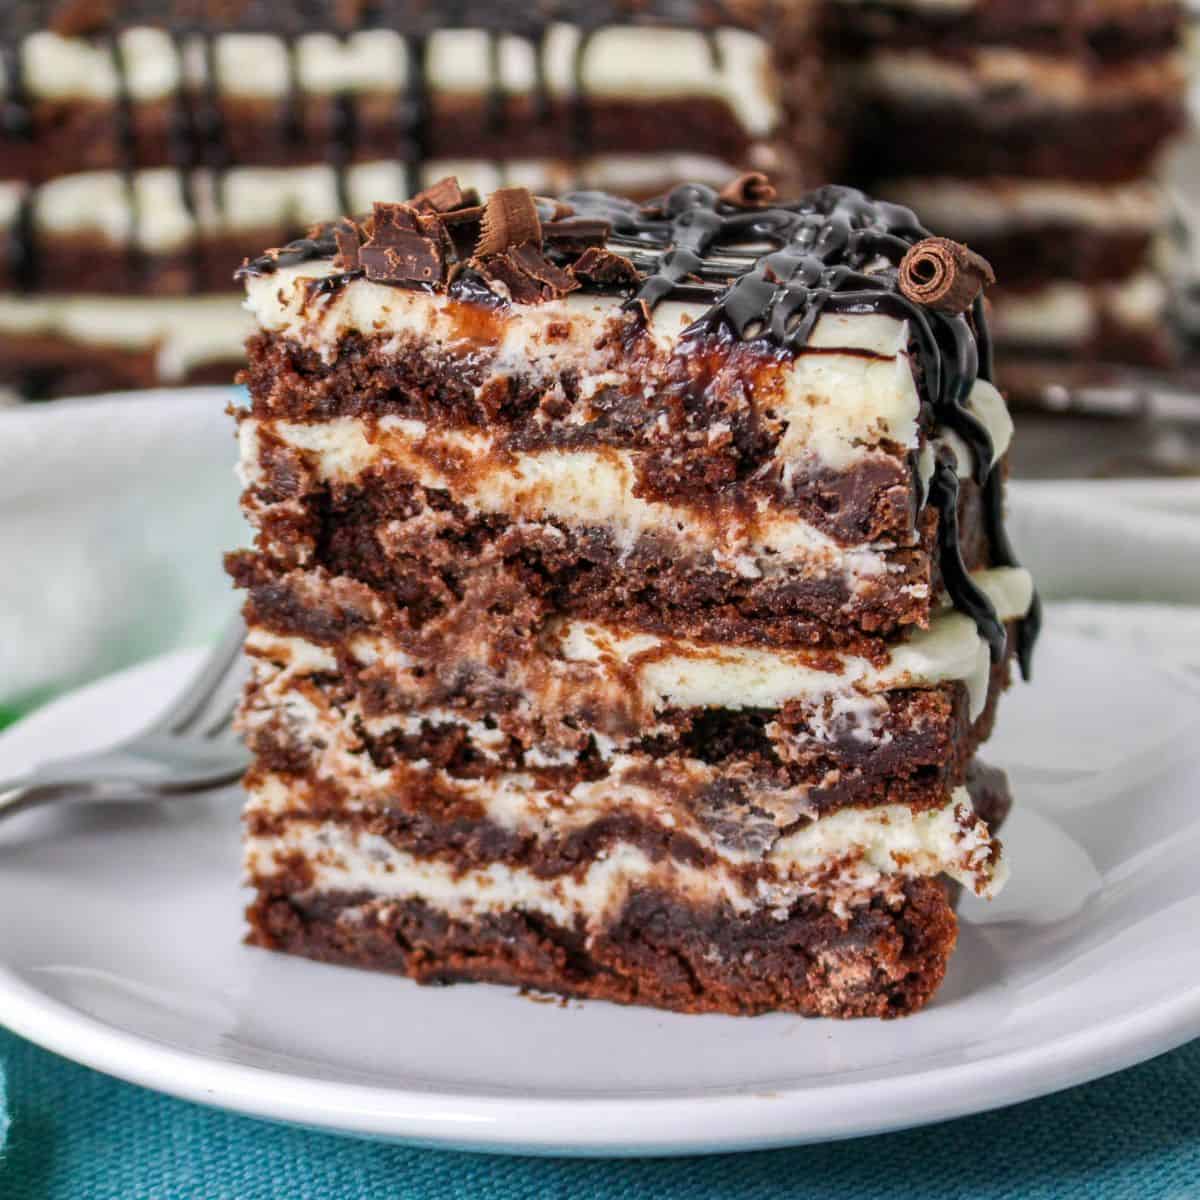 Sugar Free Brownie Lasagna, a delicious copycat version of the layered Olive Garden Dessert made with no added sugar.